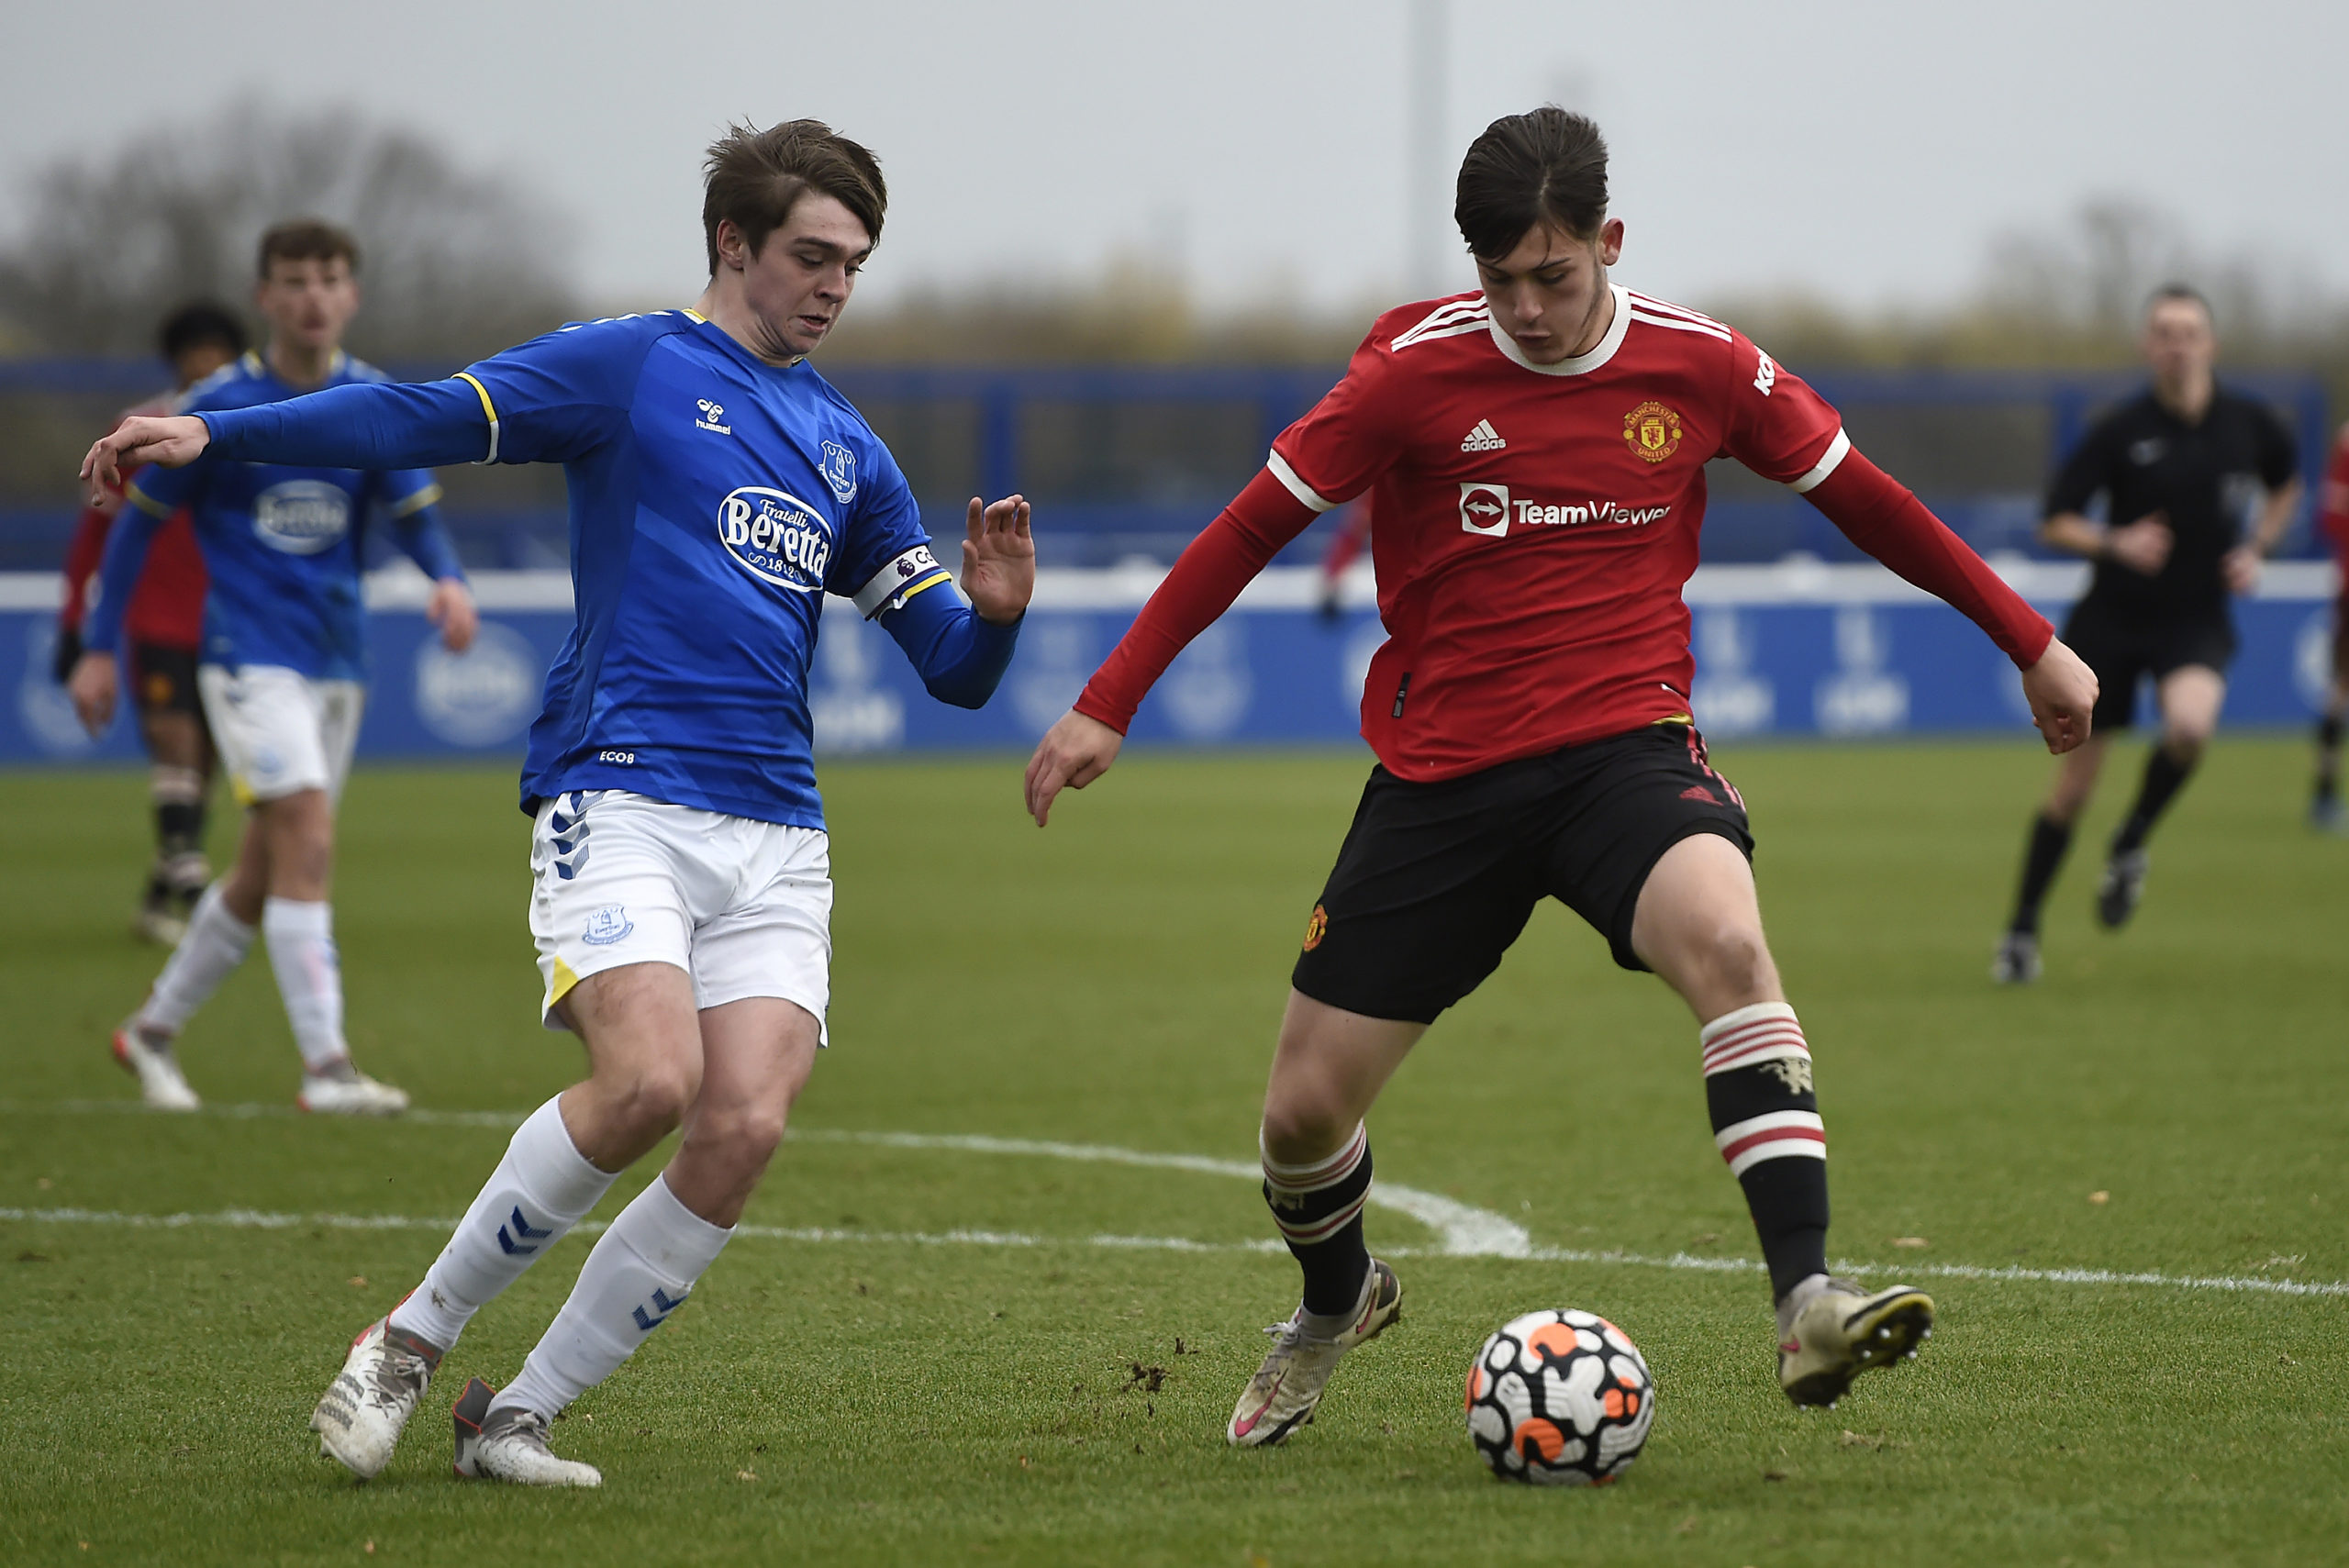 United teenager Norkett signs for Gainsborough on loan